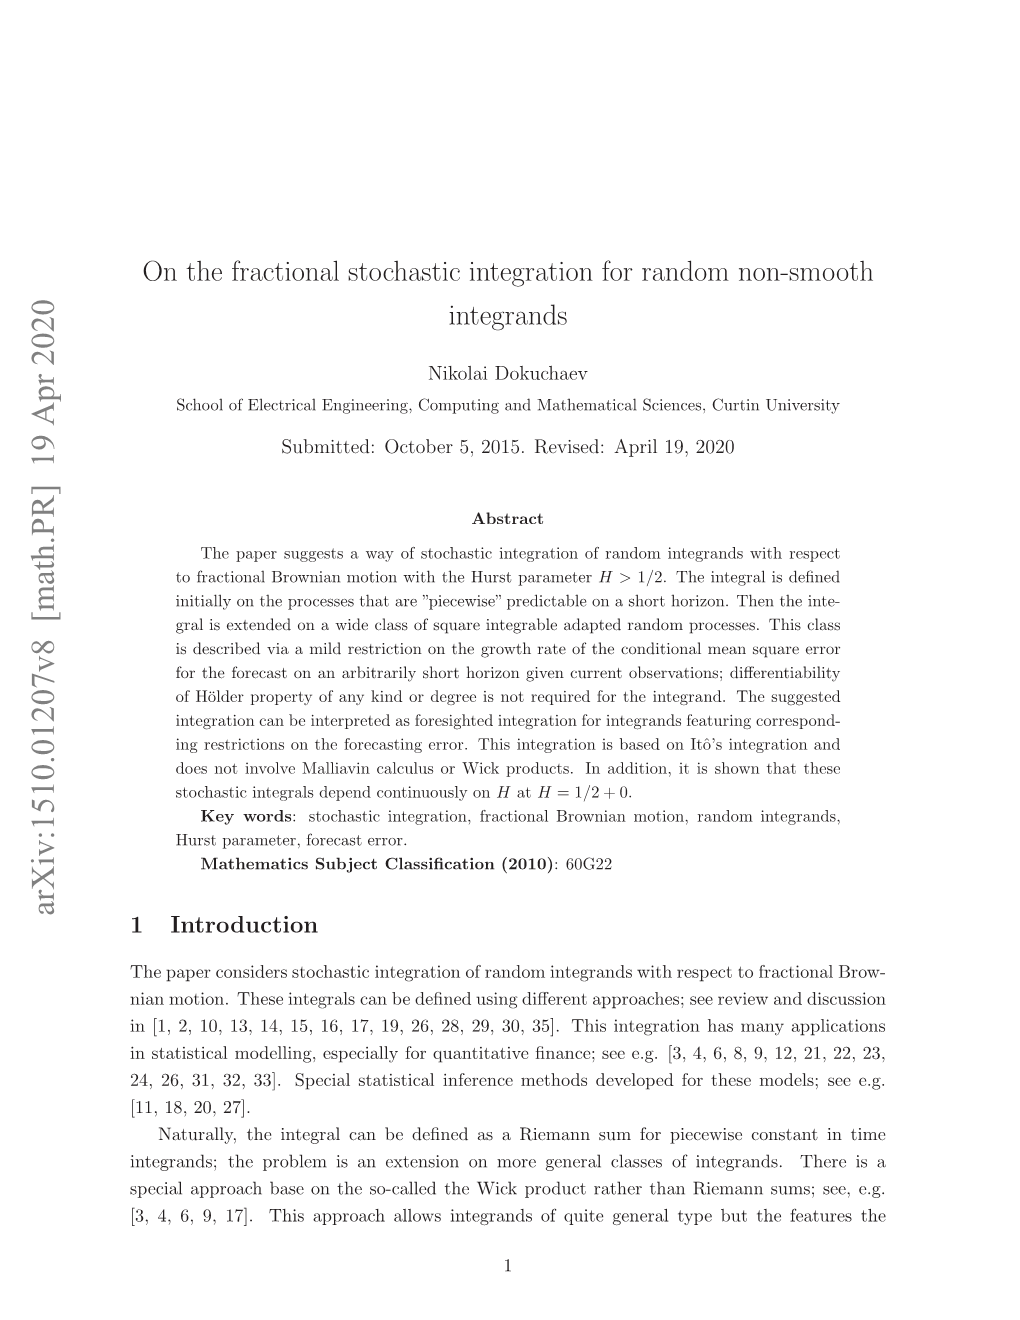 On the Fractional Stochastic Integration for Random Non-Smooth Integrands